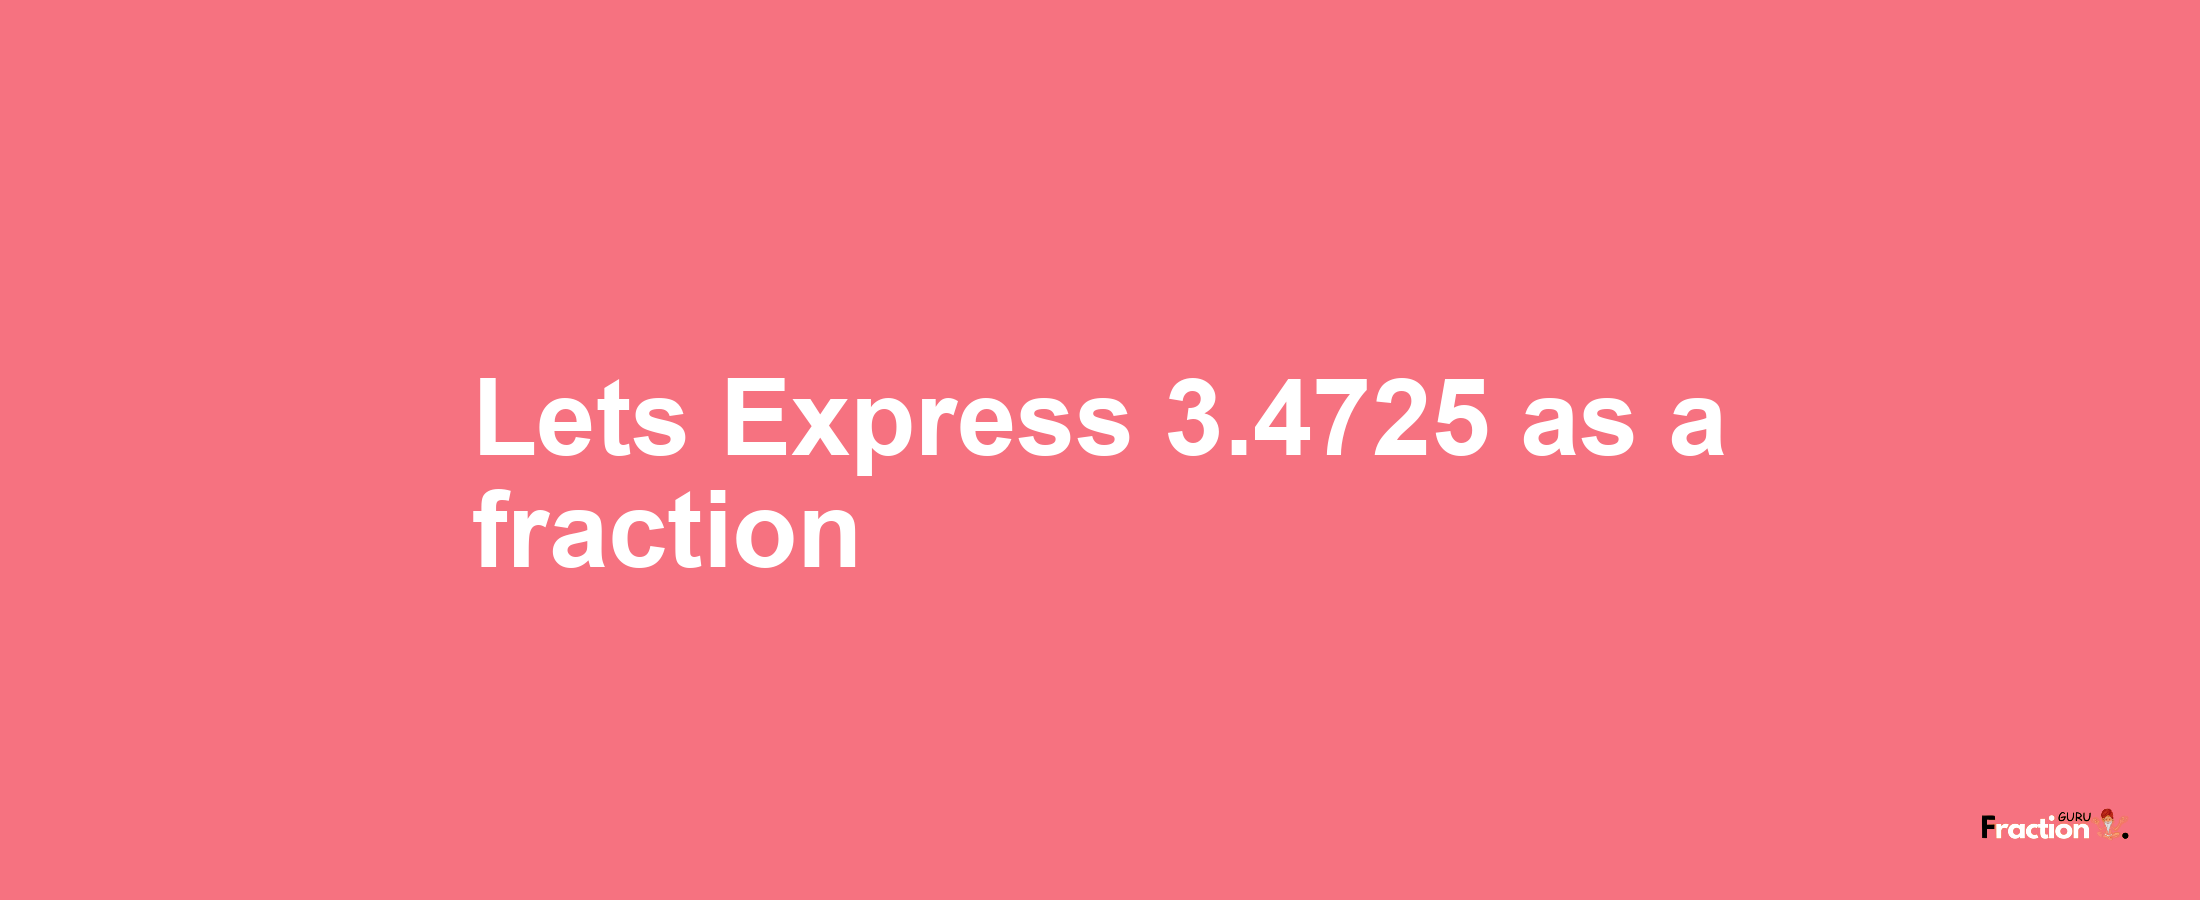 Lets Express 3.4725 as afraction